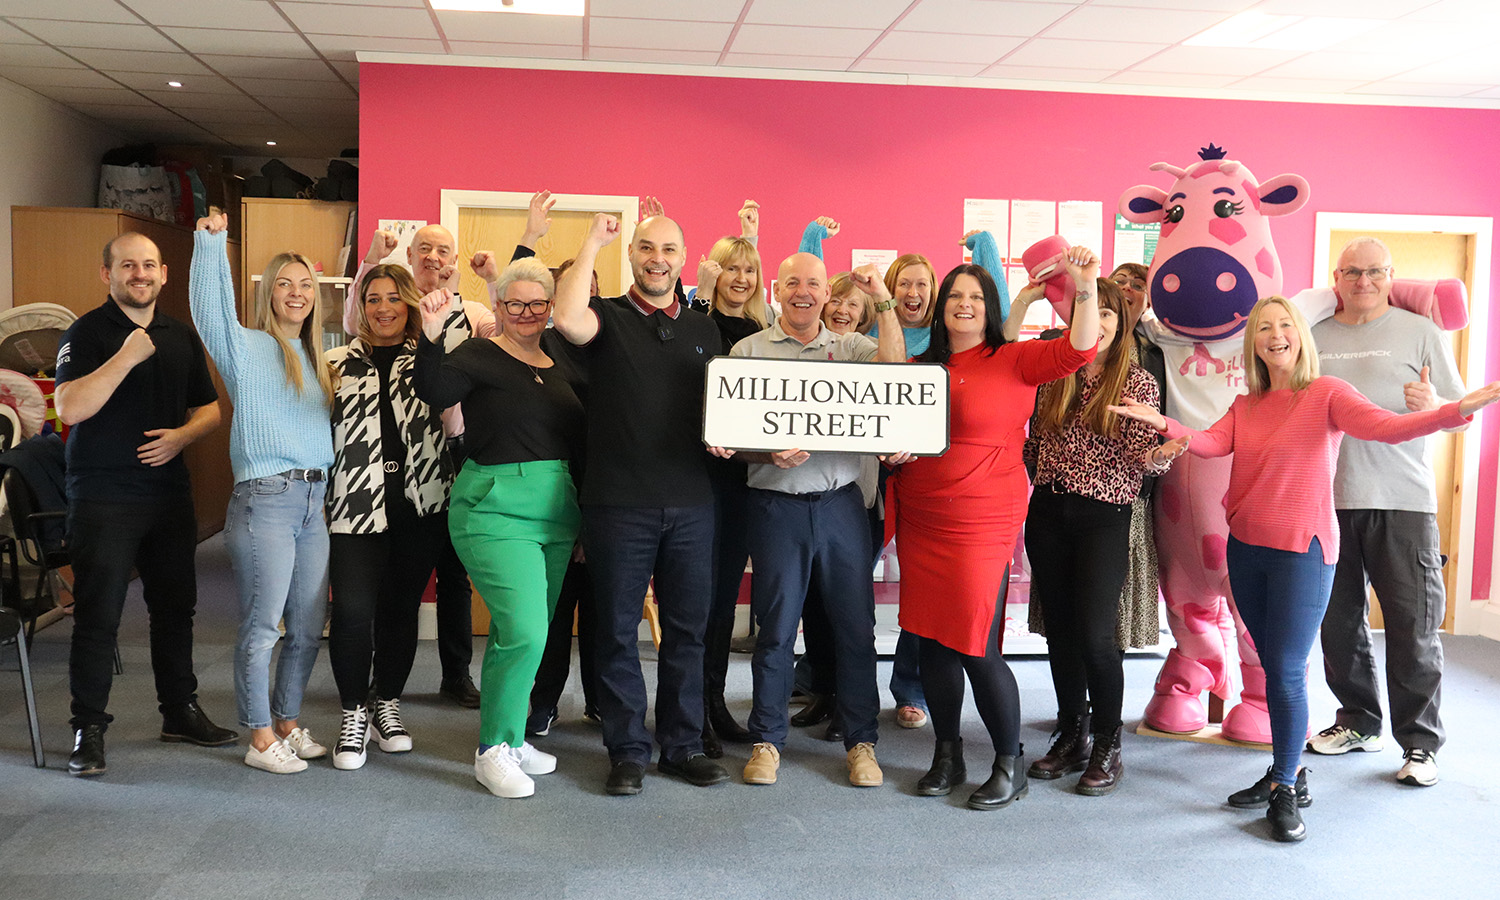 Thanks to players of People's Postcode Lottery, first aid charity Millie's Trust has received £70,000 from Postcode Community Trust